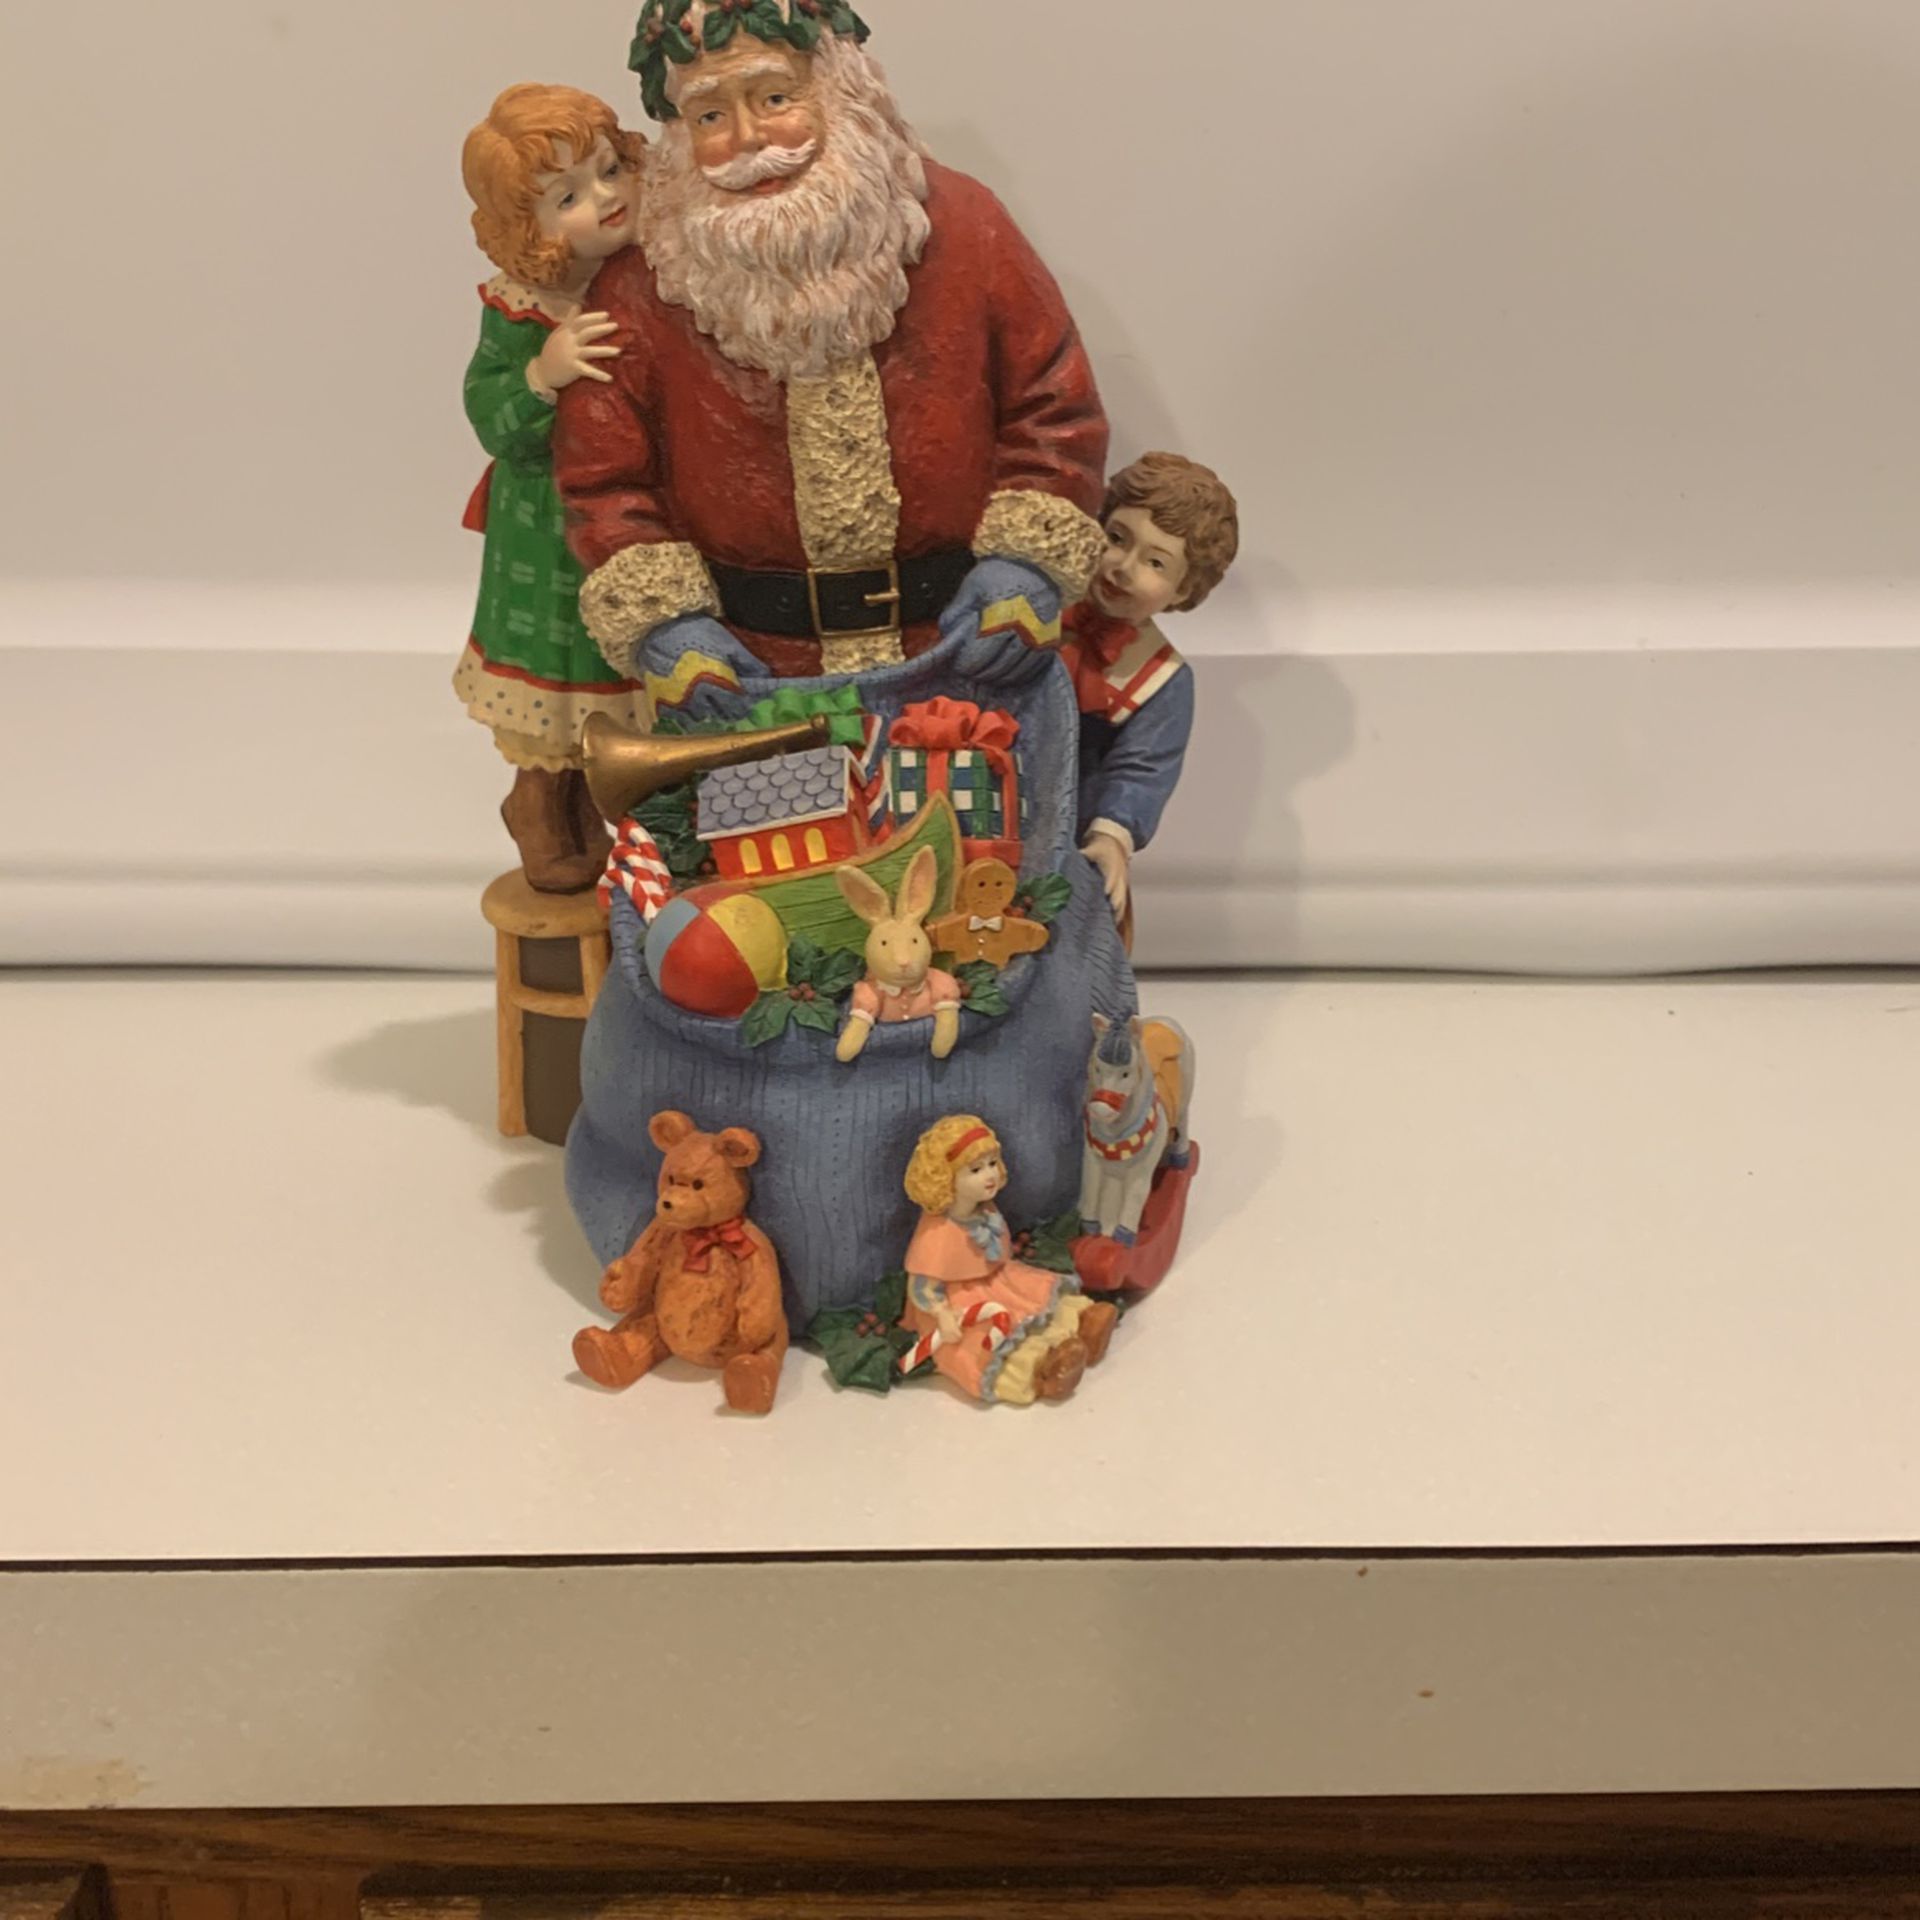 Susan Winget “Santa’s Toy Pack II”, First Edition 1998, Number 9